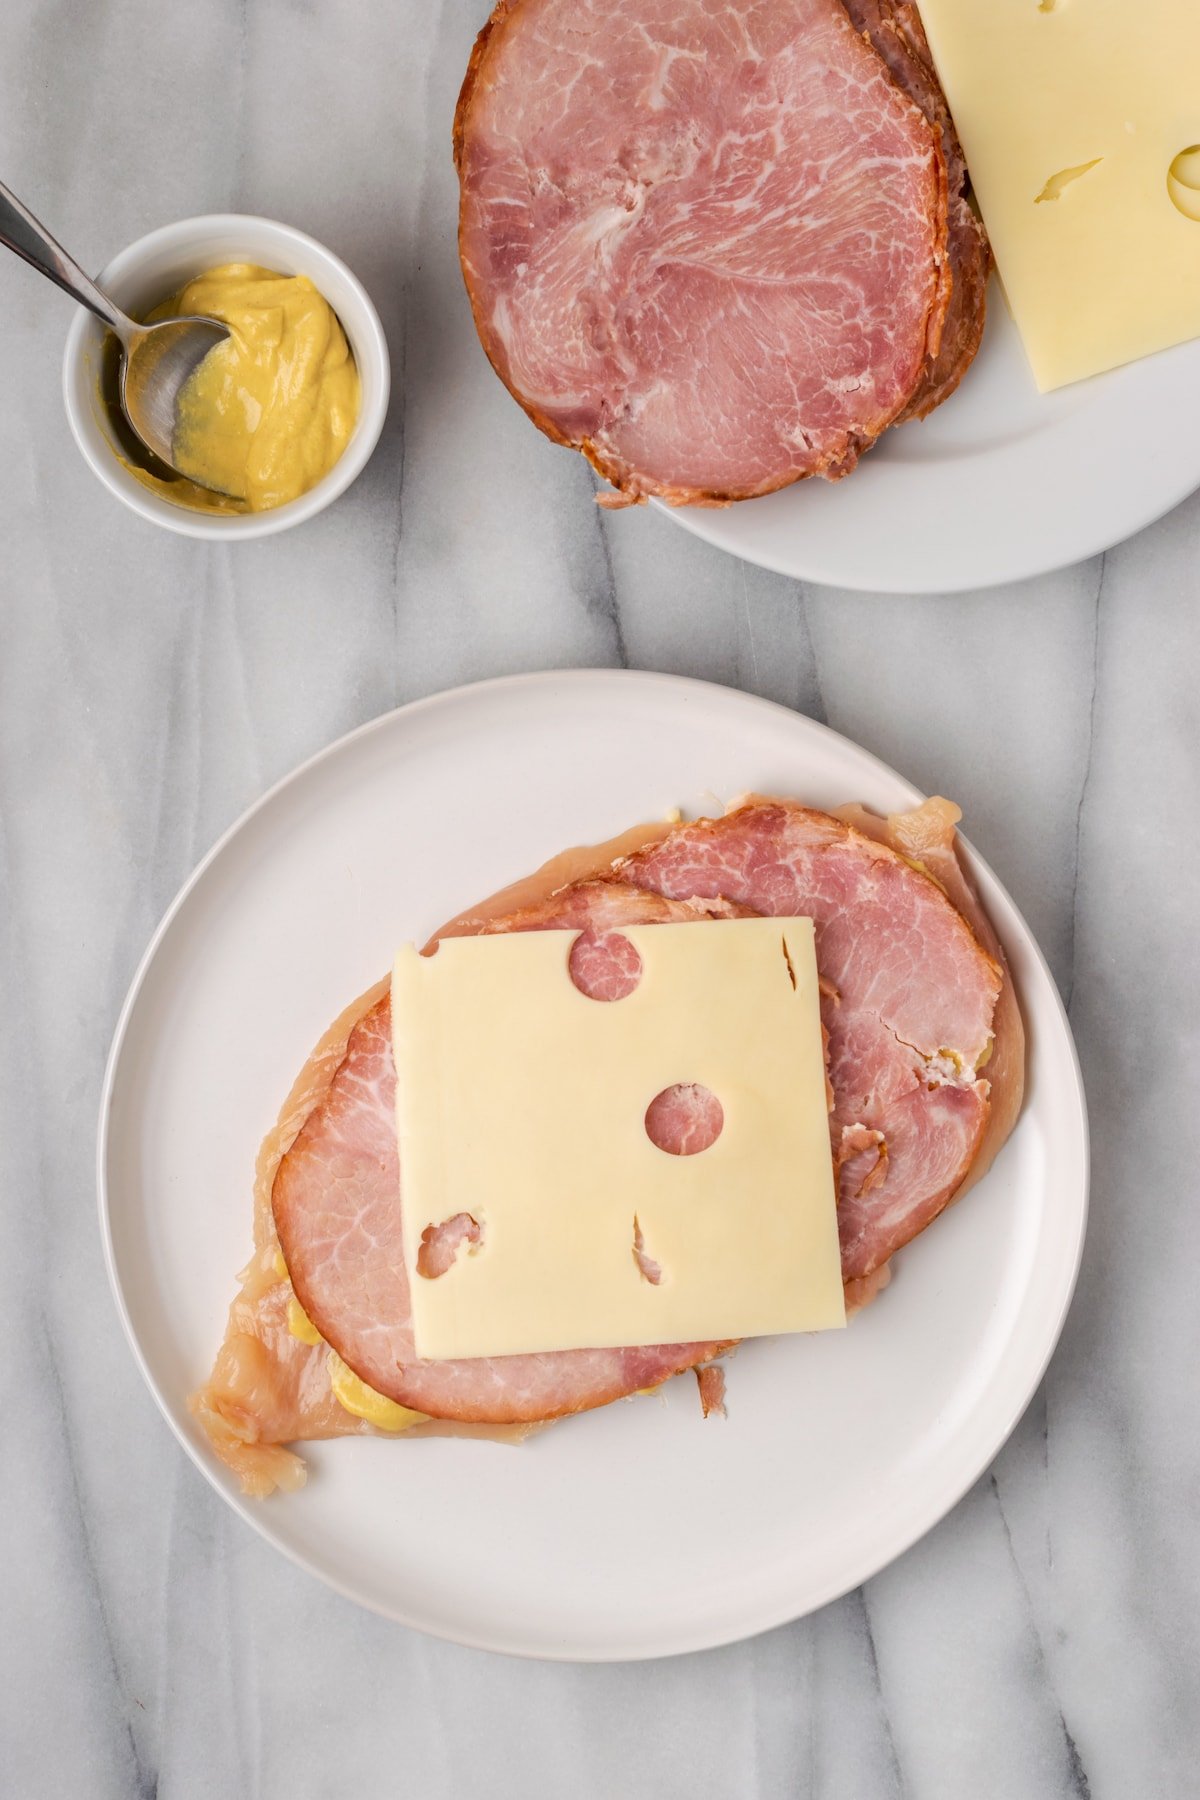 Overhead view of a chicken breast on a plate, topped with hap and Swiss cheese, next to a plate of ham and cheese and a bowl of mustard